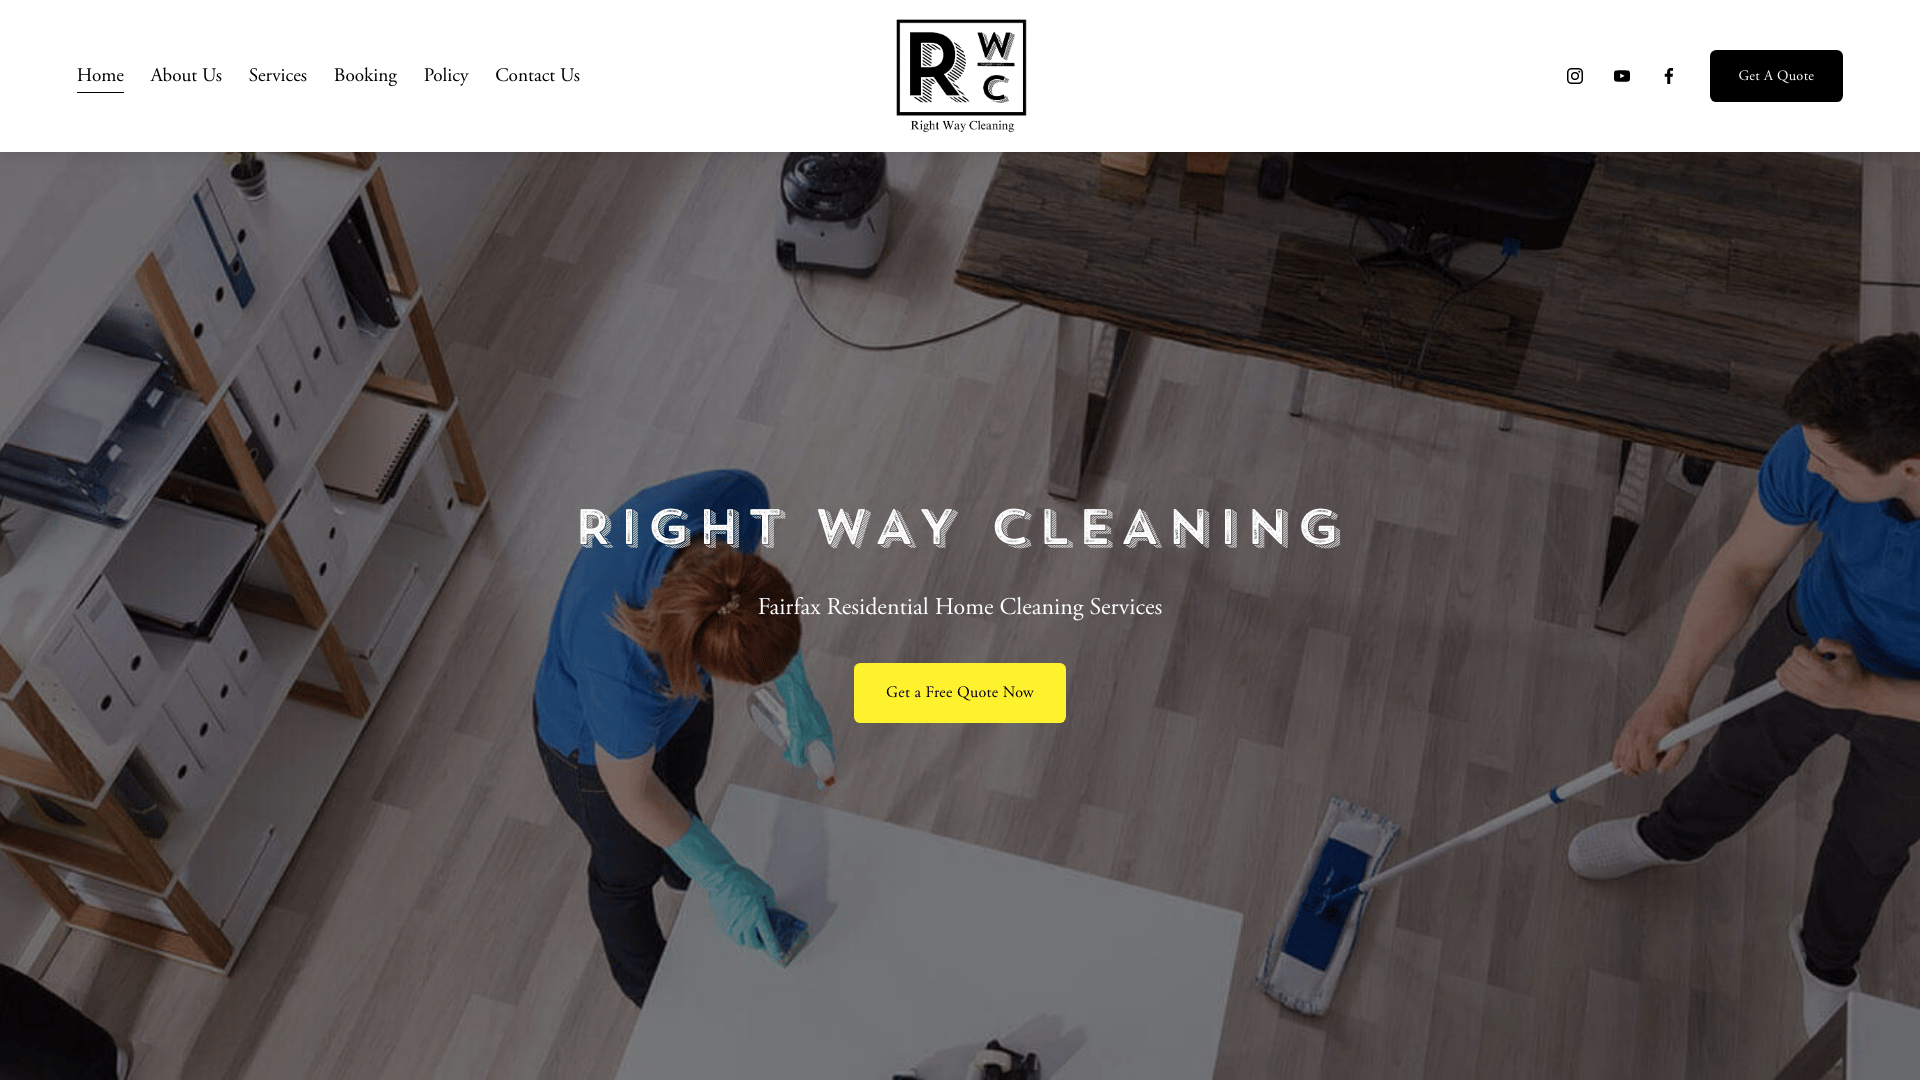 Screenshot of the Right Way Cleaning website